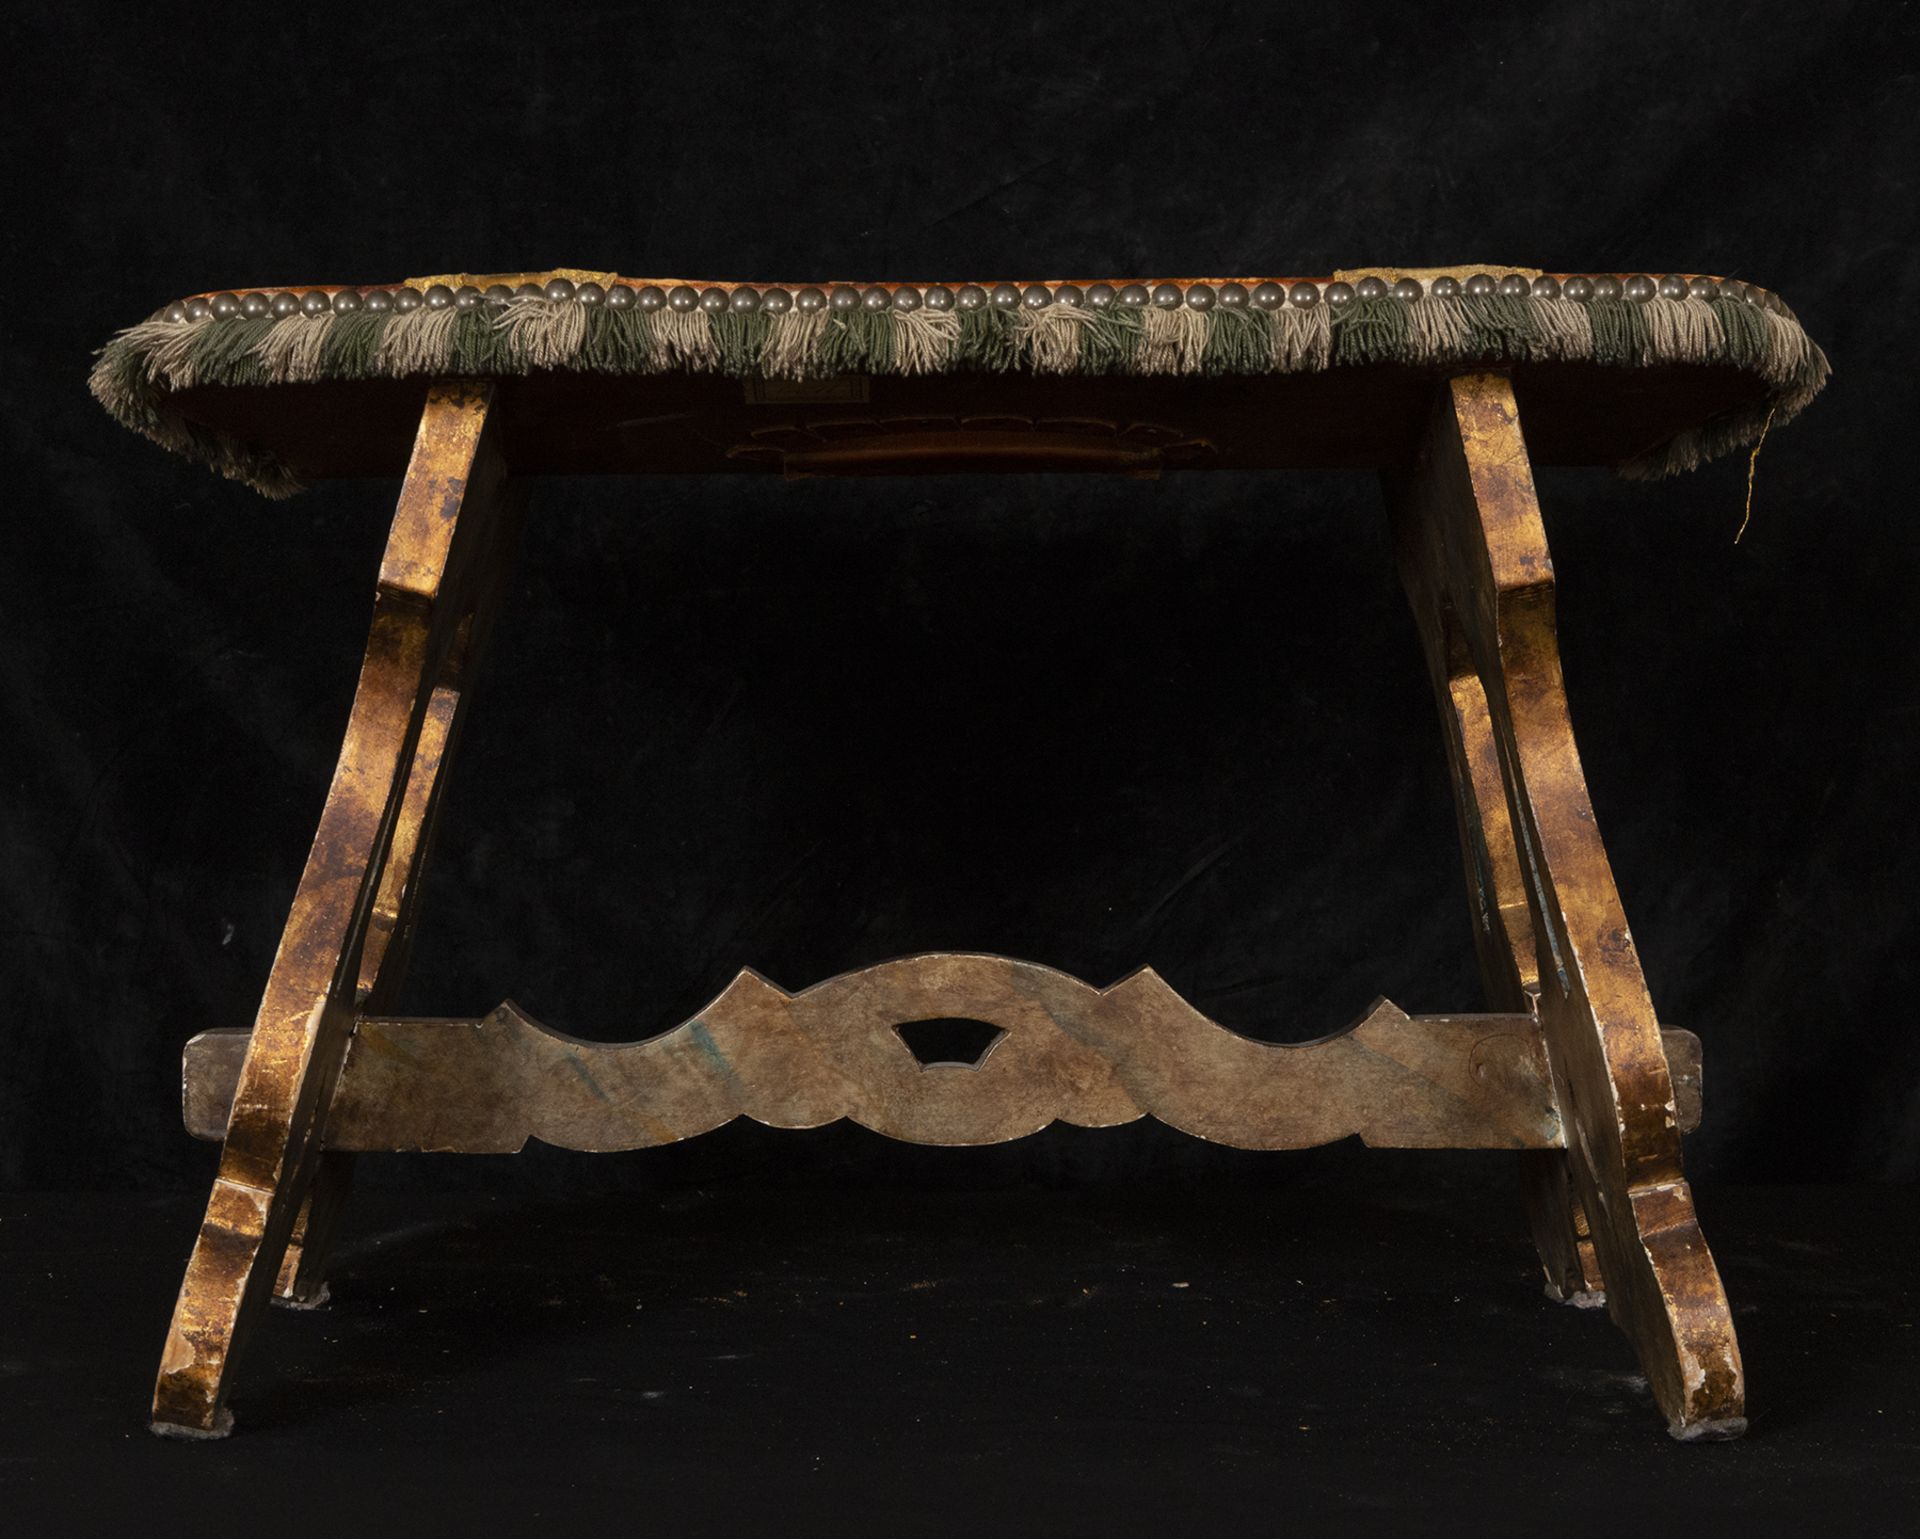 Pair of Venetian Armchairs in wood and velvet, 18th century - Image 7 of 7